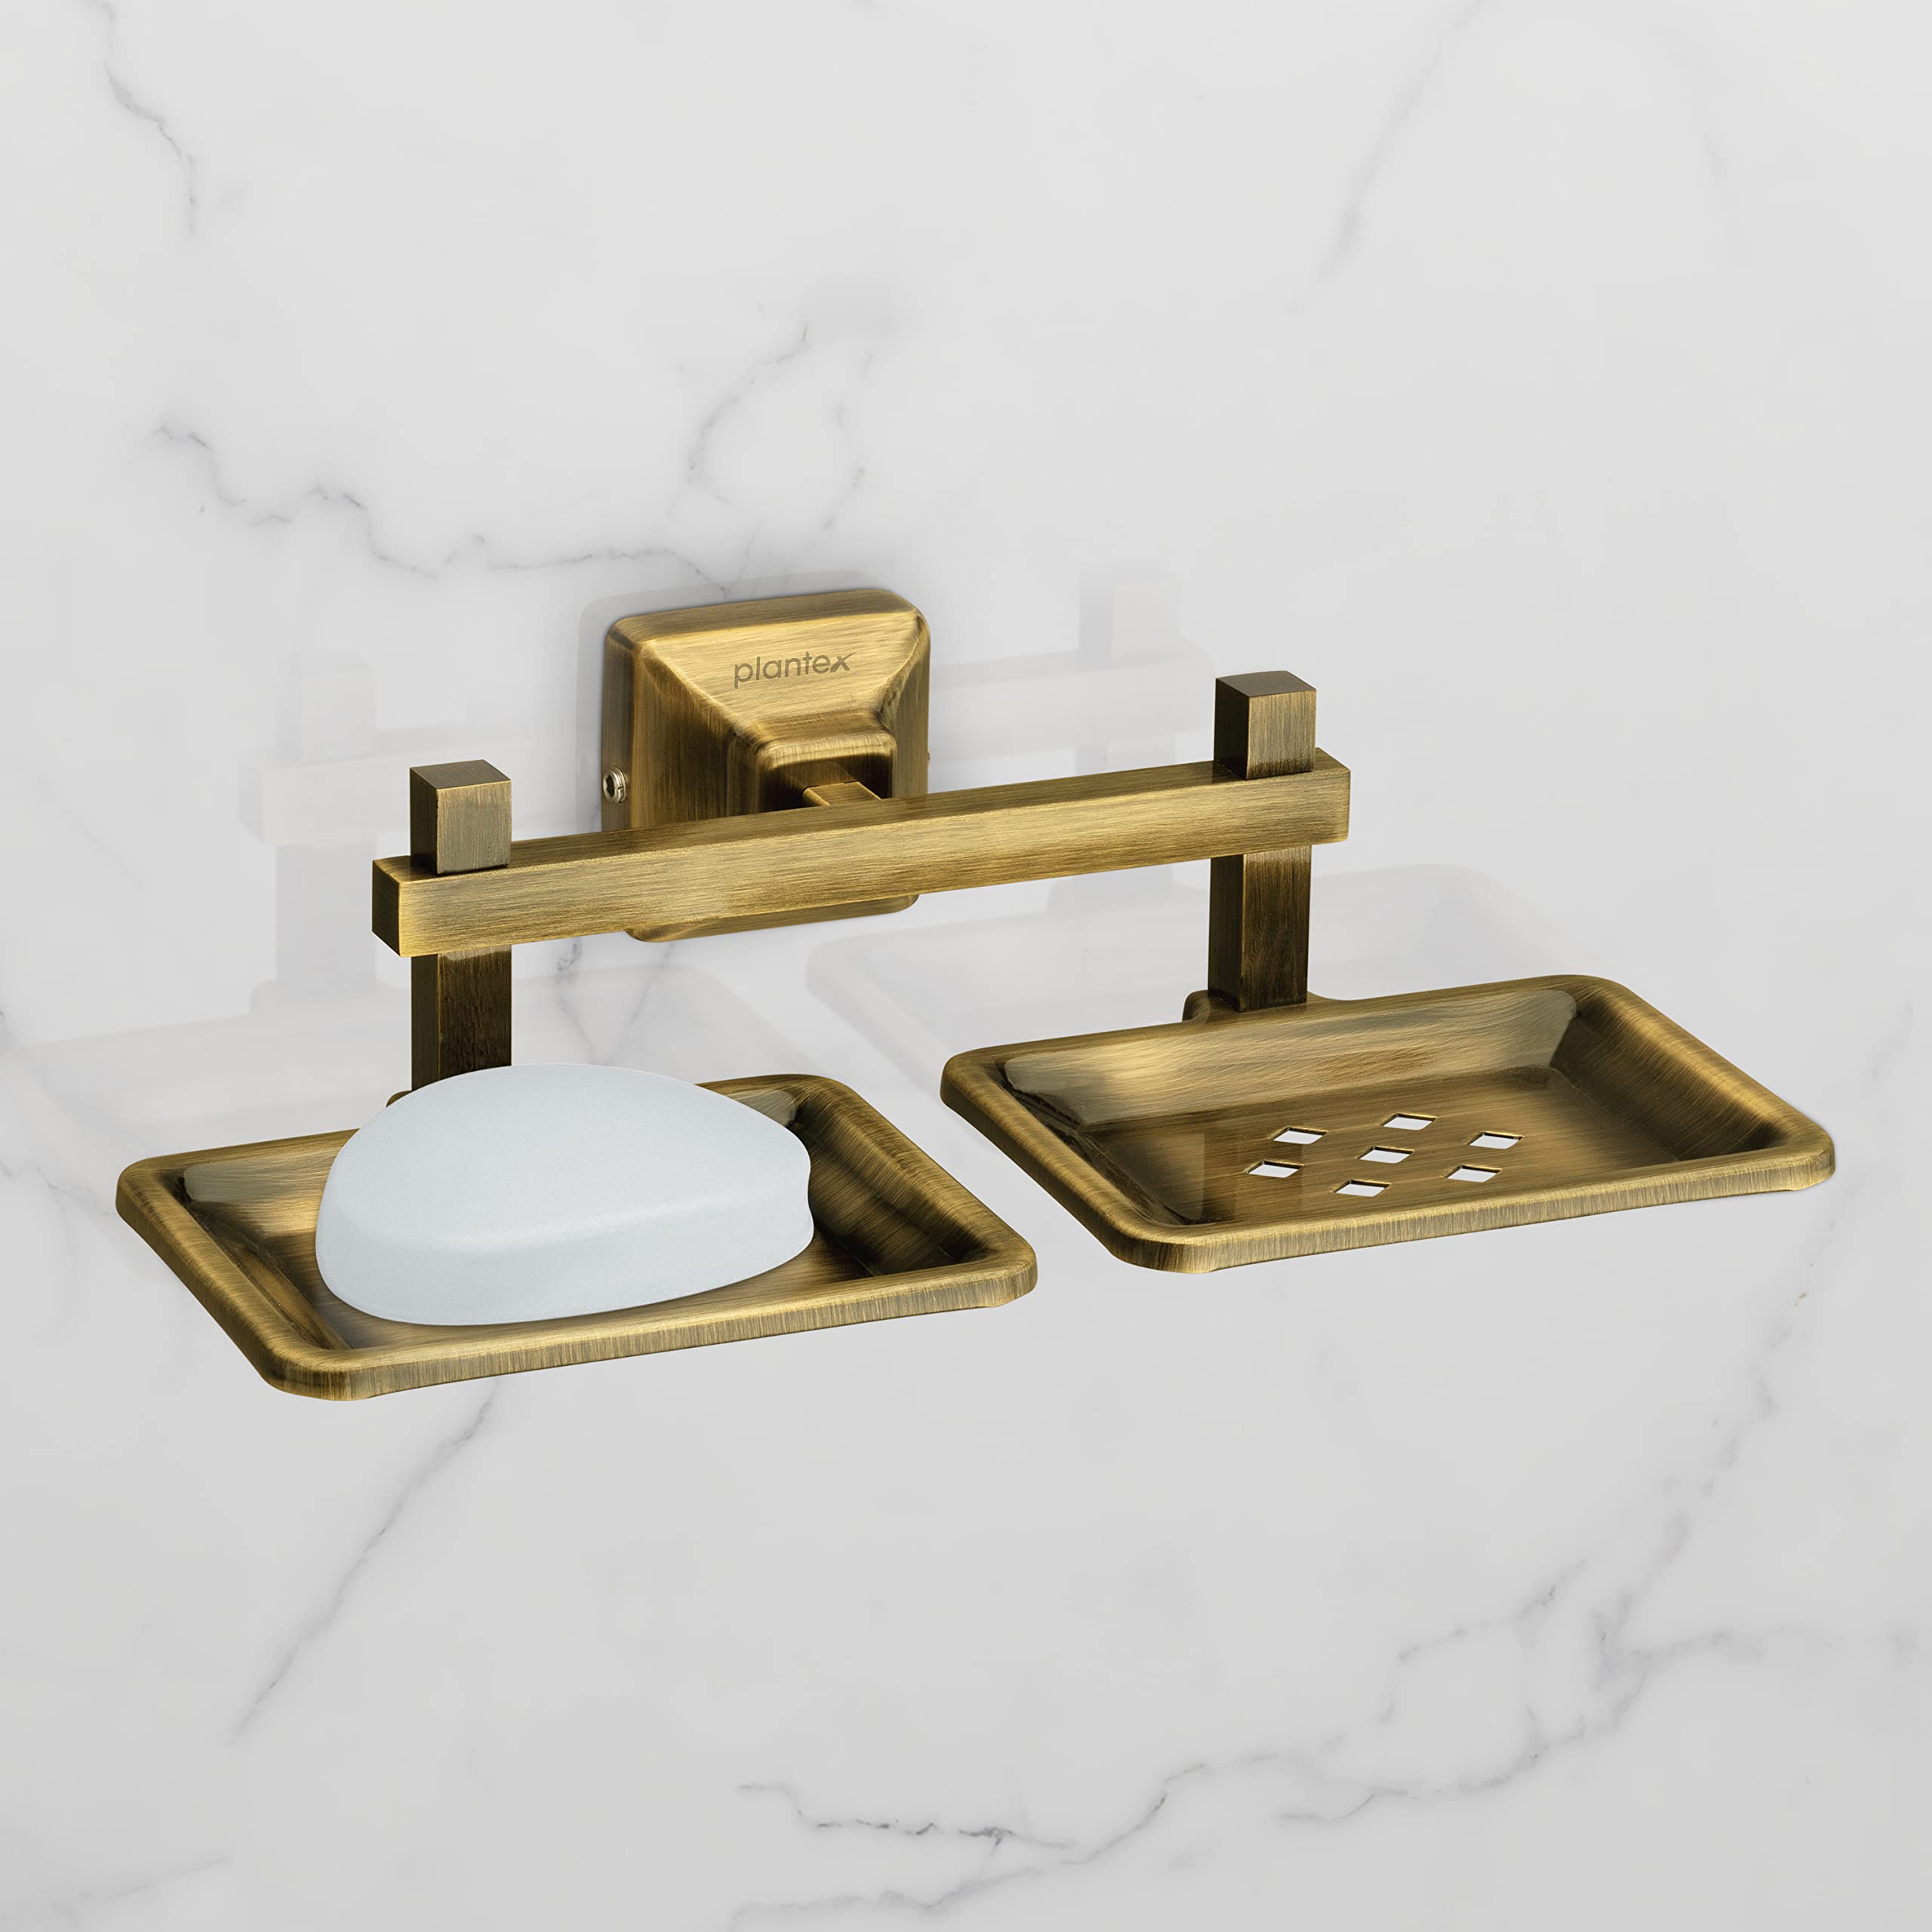 Plantex Squaro Antique soap Holder Stand for Bathroom and wash Basin (304 Stainless Steel)